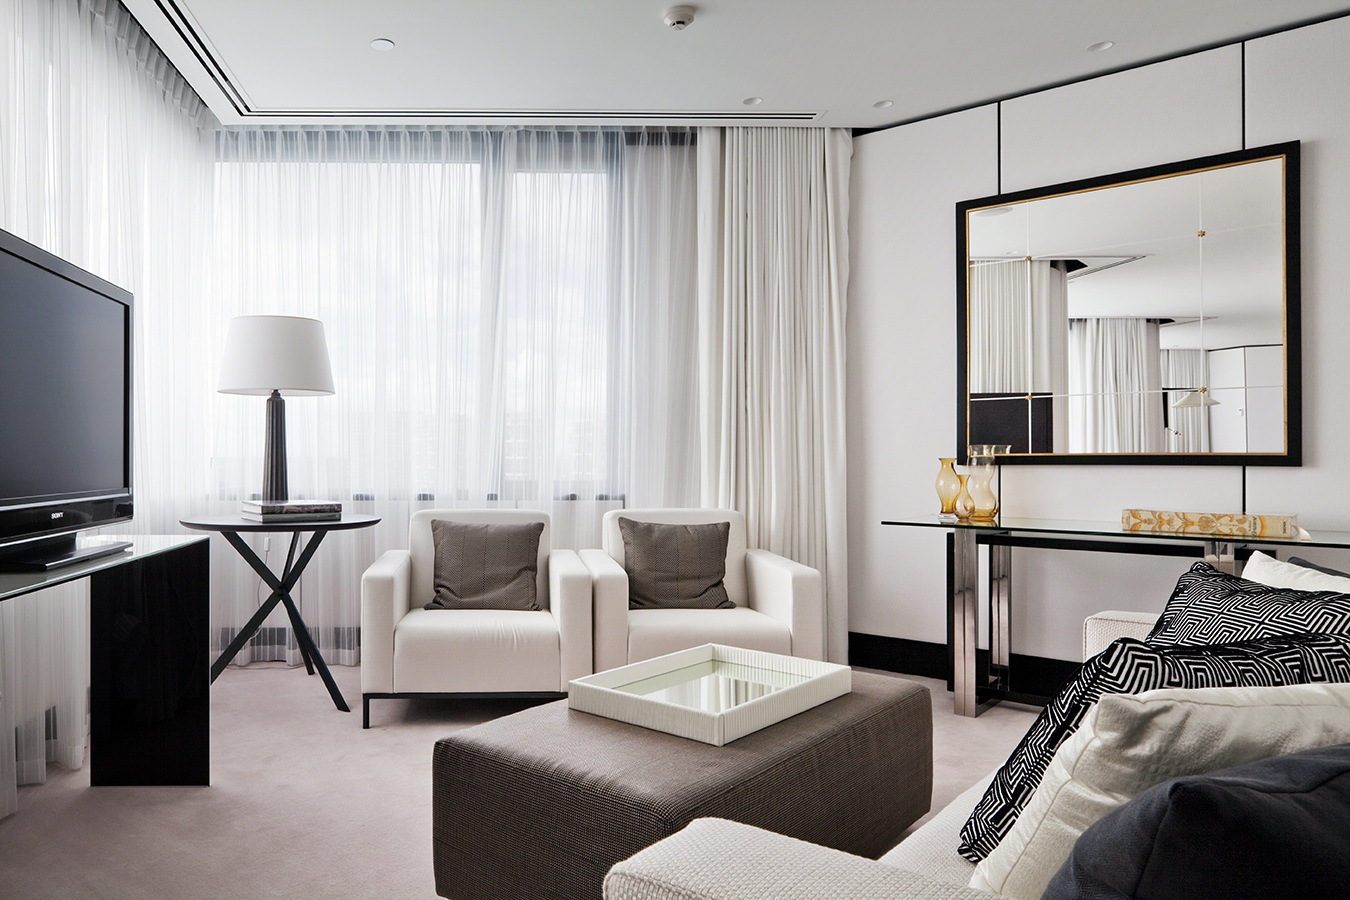 PRESIDENTIAL SUITE, CROWN PERTH FOR BLAINEY NORTH & ASSOCIATES